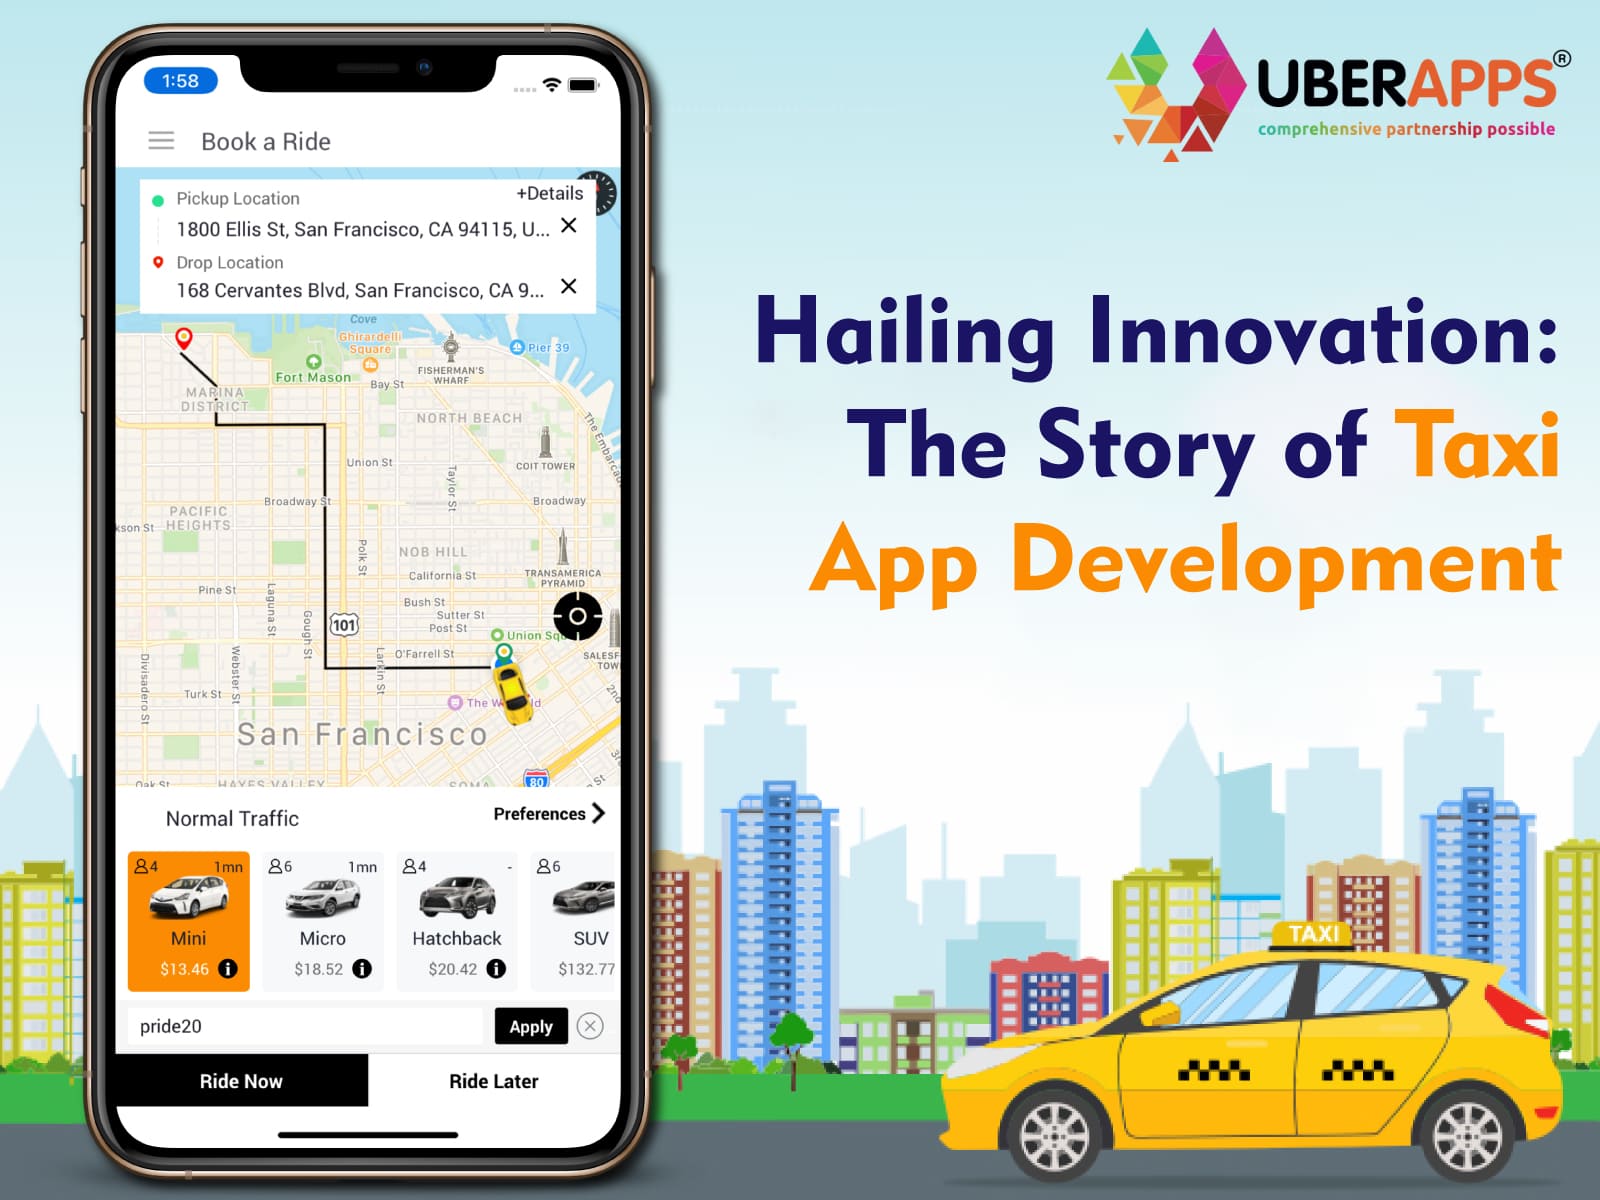 Hailing Innovation: The Story of Taxi App Development